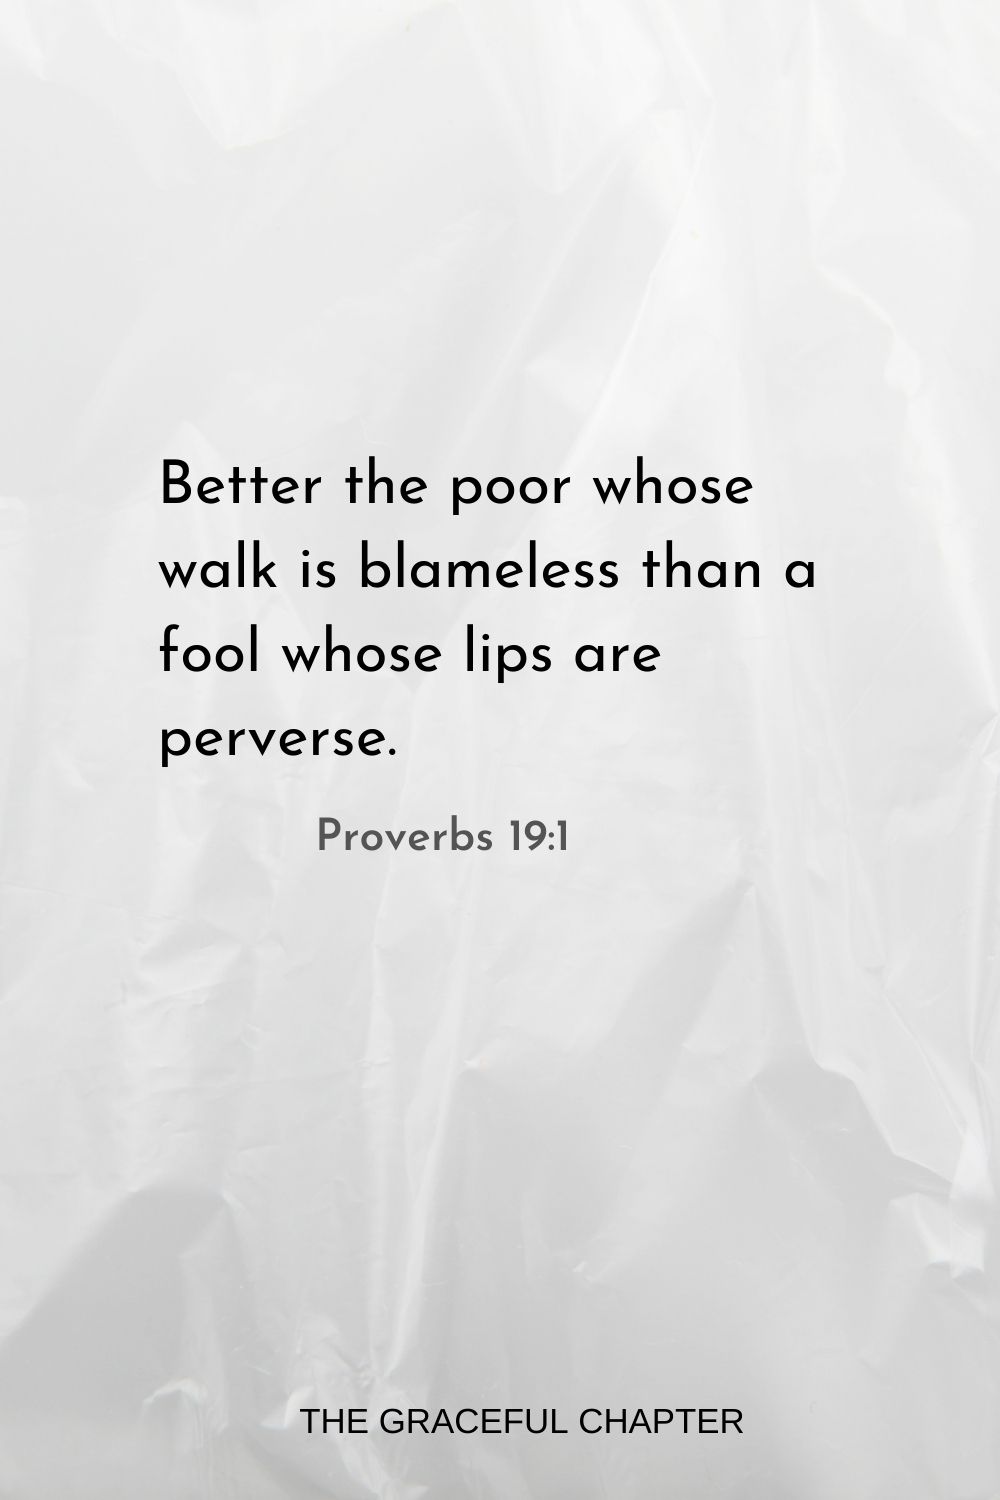 Better the poor whose walk is blameless than a fool whose lips are perverse. Proverbs 19:1